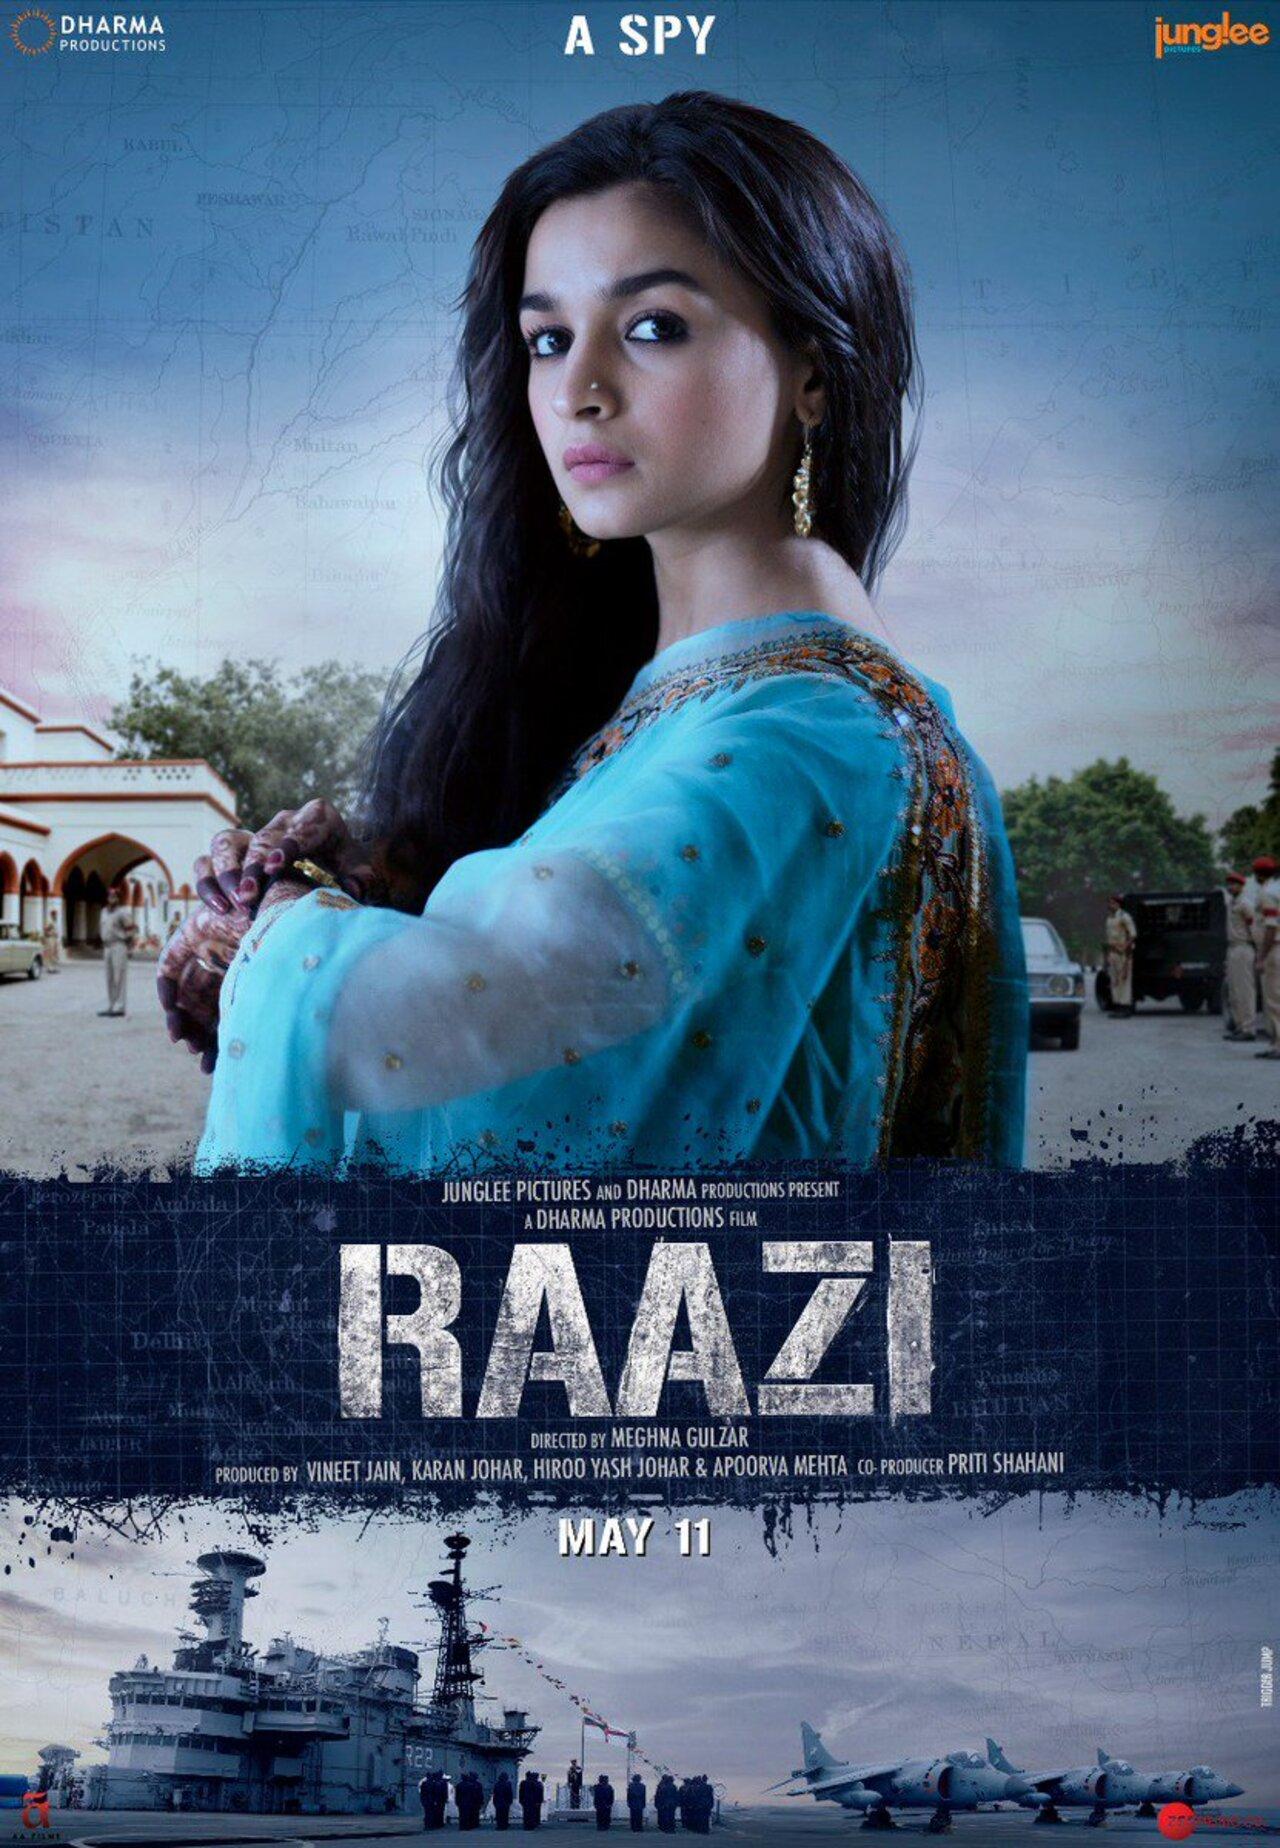 'Raazi' starring Alia Bhatt was directed by Meghna Gulzar and traces the story of an Indian spy in Pakistan. The 2018 film ranks at the third spot with a lifetime domestic collectiion of Rs 123.84